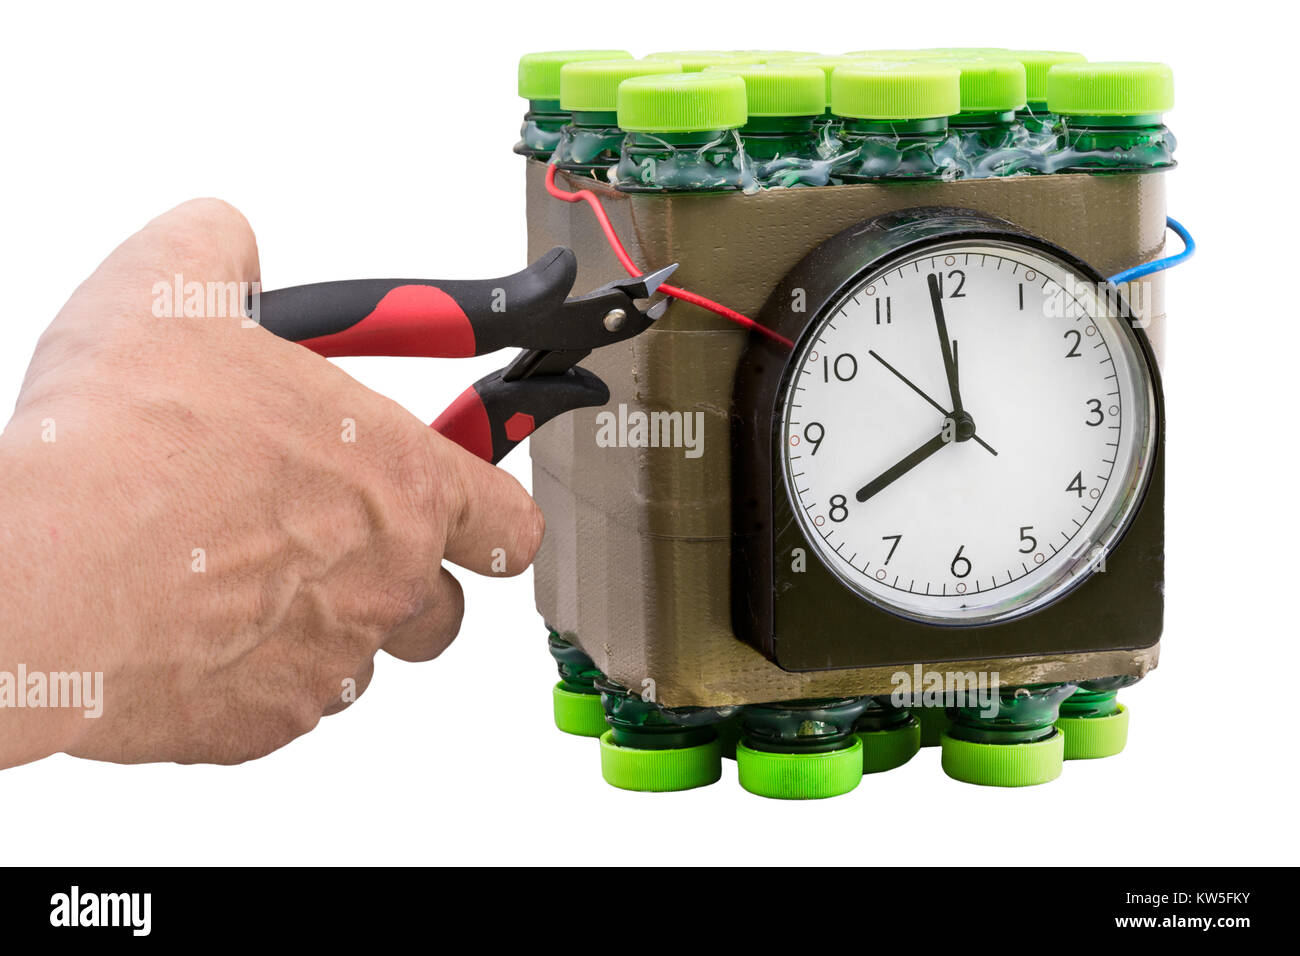 Deactivation of timed bomb. Detail of the hand during disposal of dangerous timebomb on white background. Isolated. Stock Photo